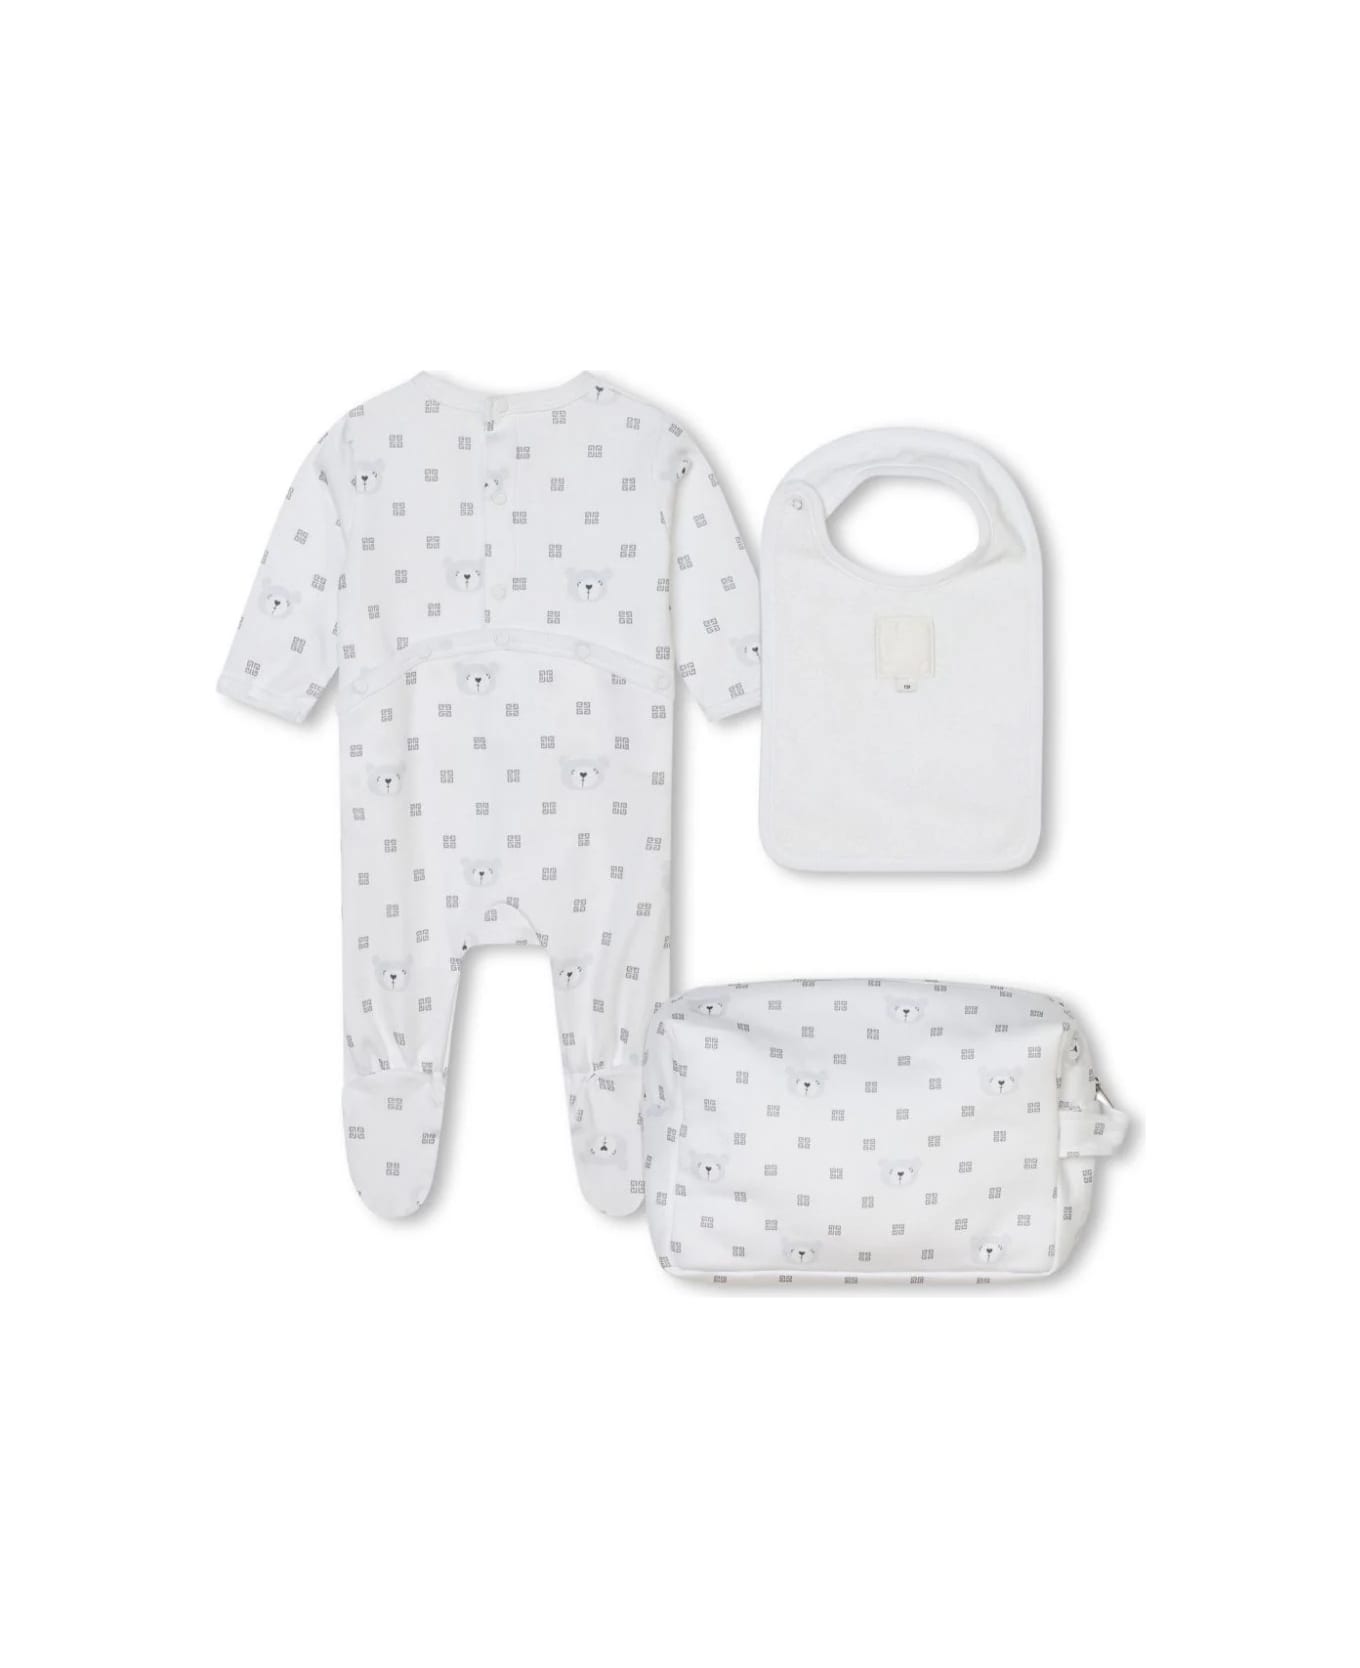 Givenchy Gift Set With Pyjamas, Bib And Trousse In 4g Cotton - White トップス